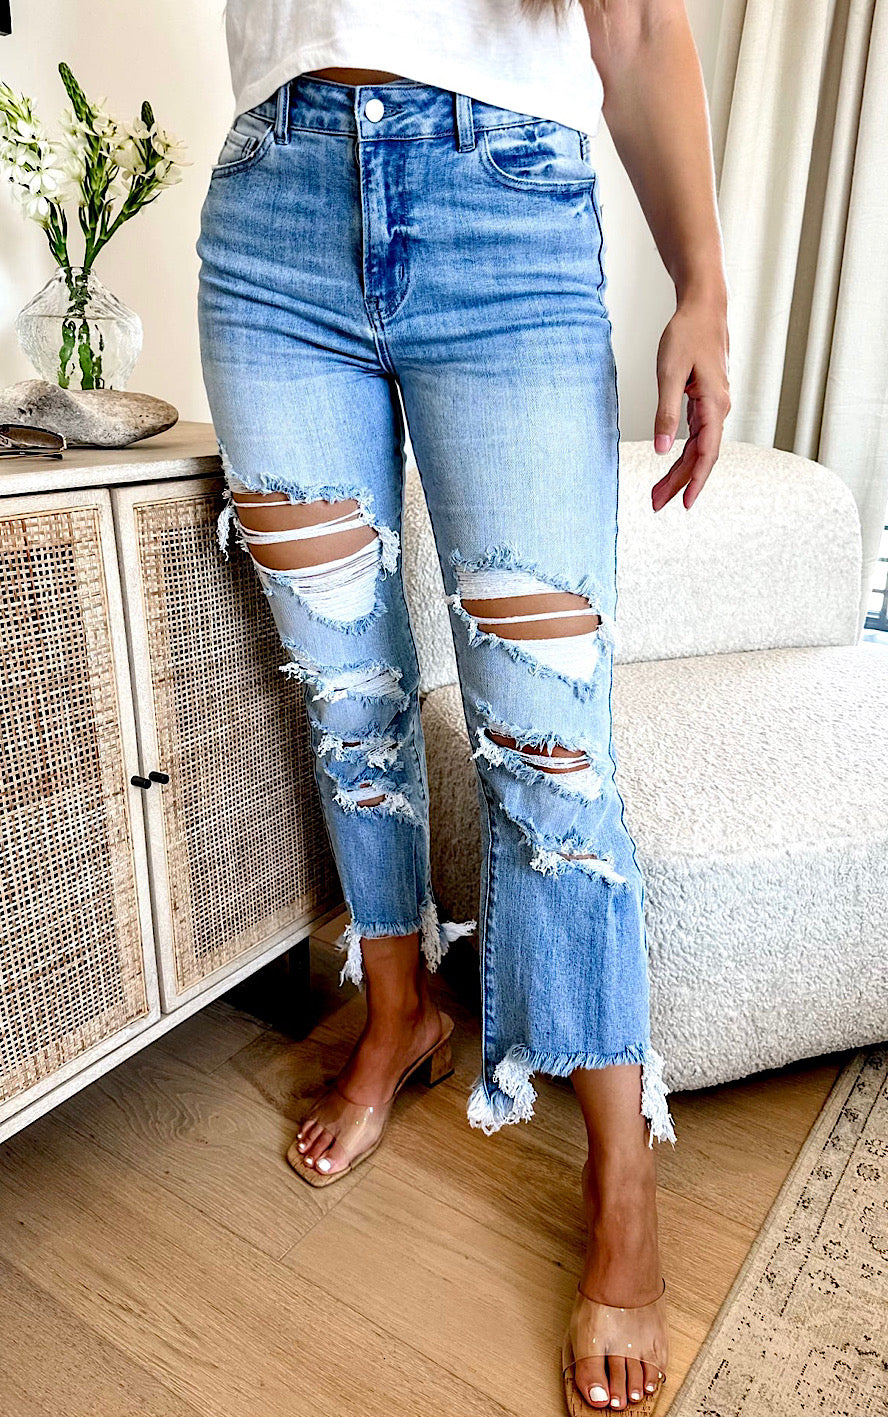 RESTOCKED! Social Calendar Distressed Jeans by Blakeley, SIZES 1-5X!